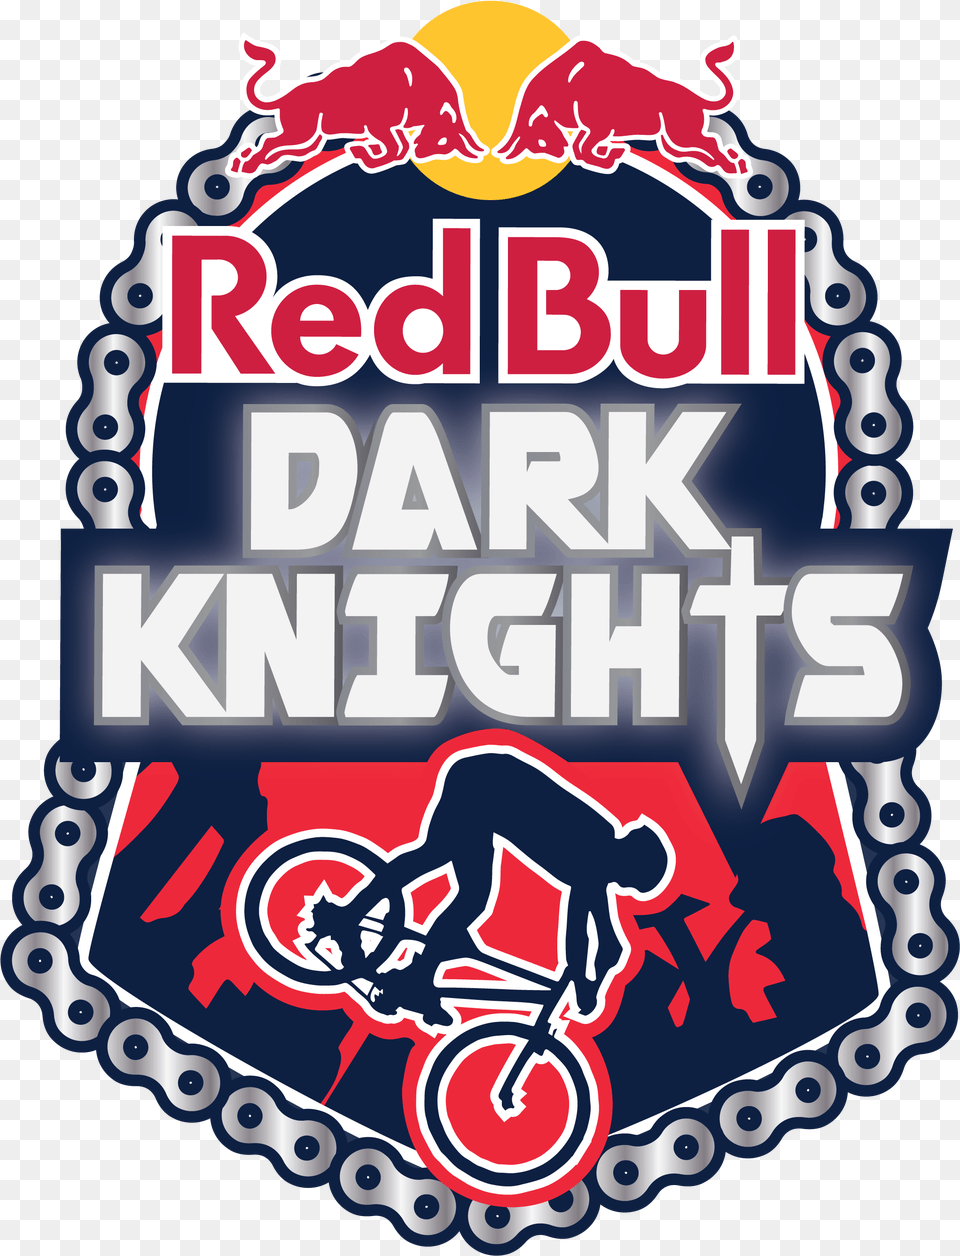 Red Bull Dark Knights, Sticker, Dynamite, Weapon, Baby Png Image